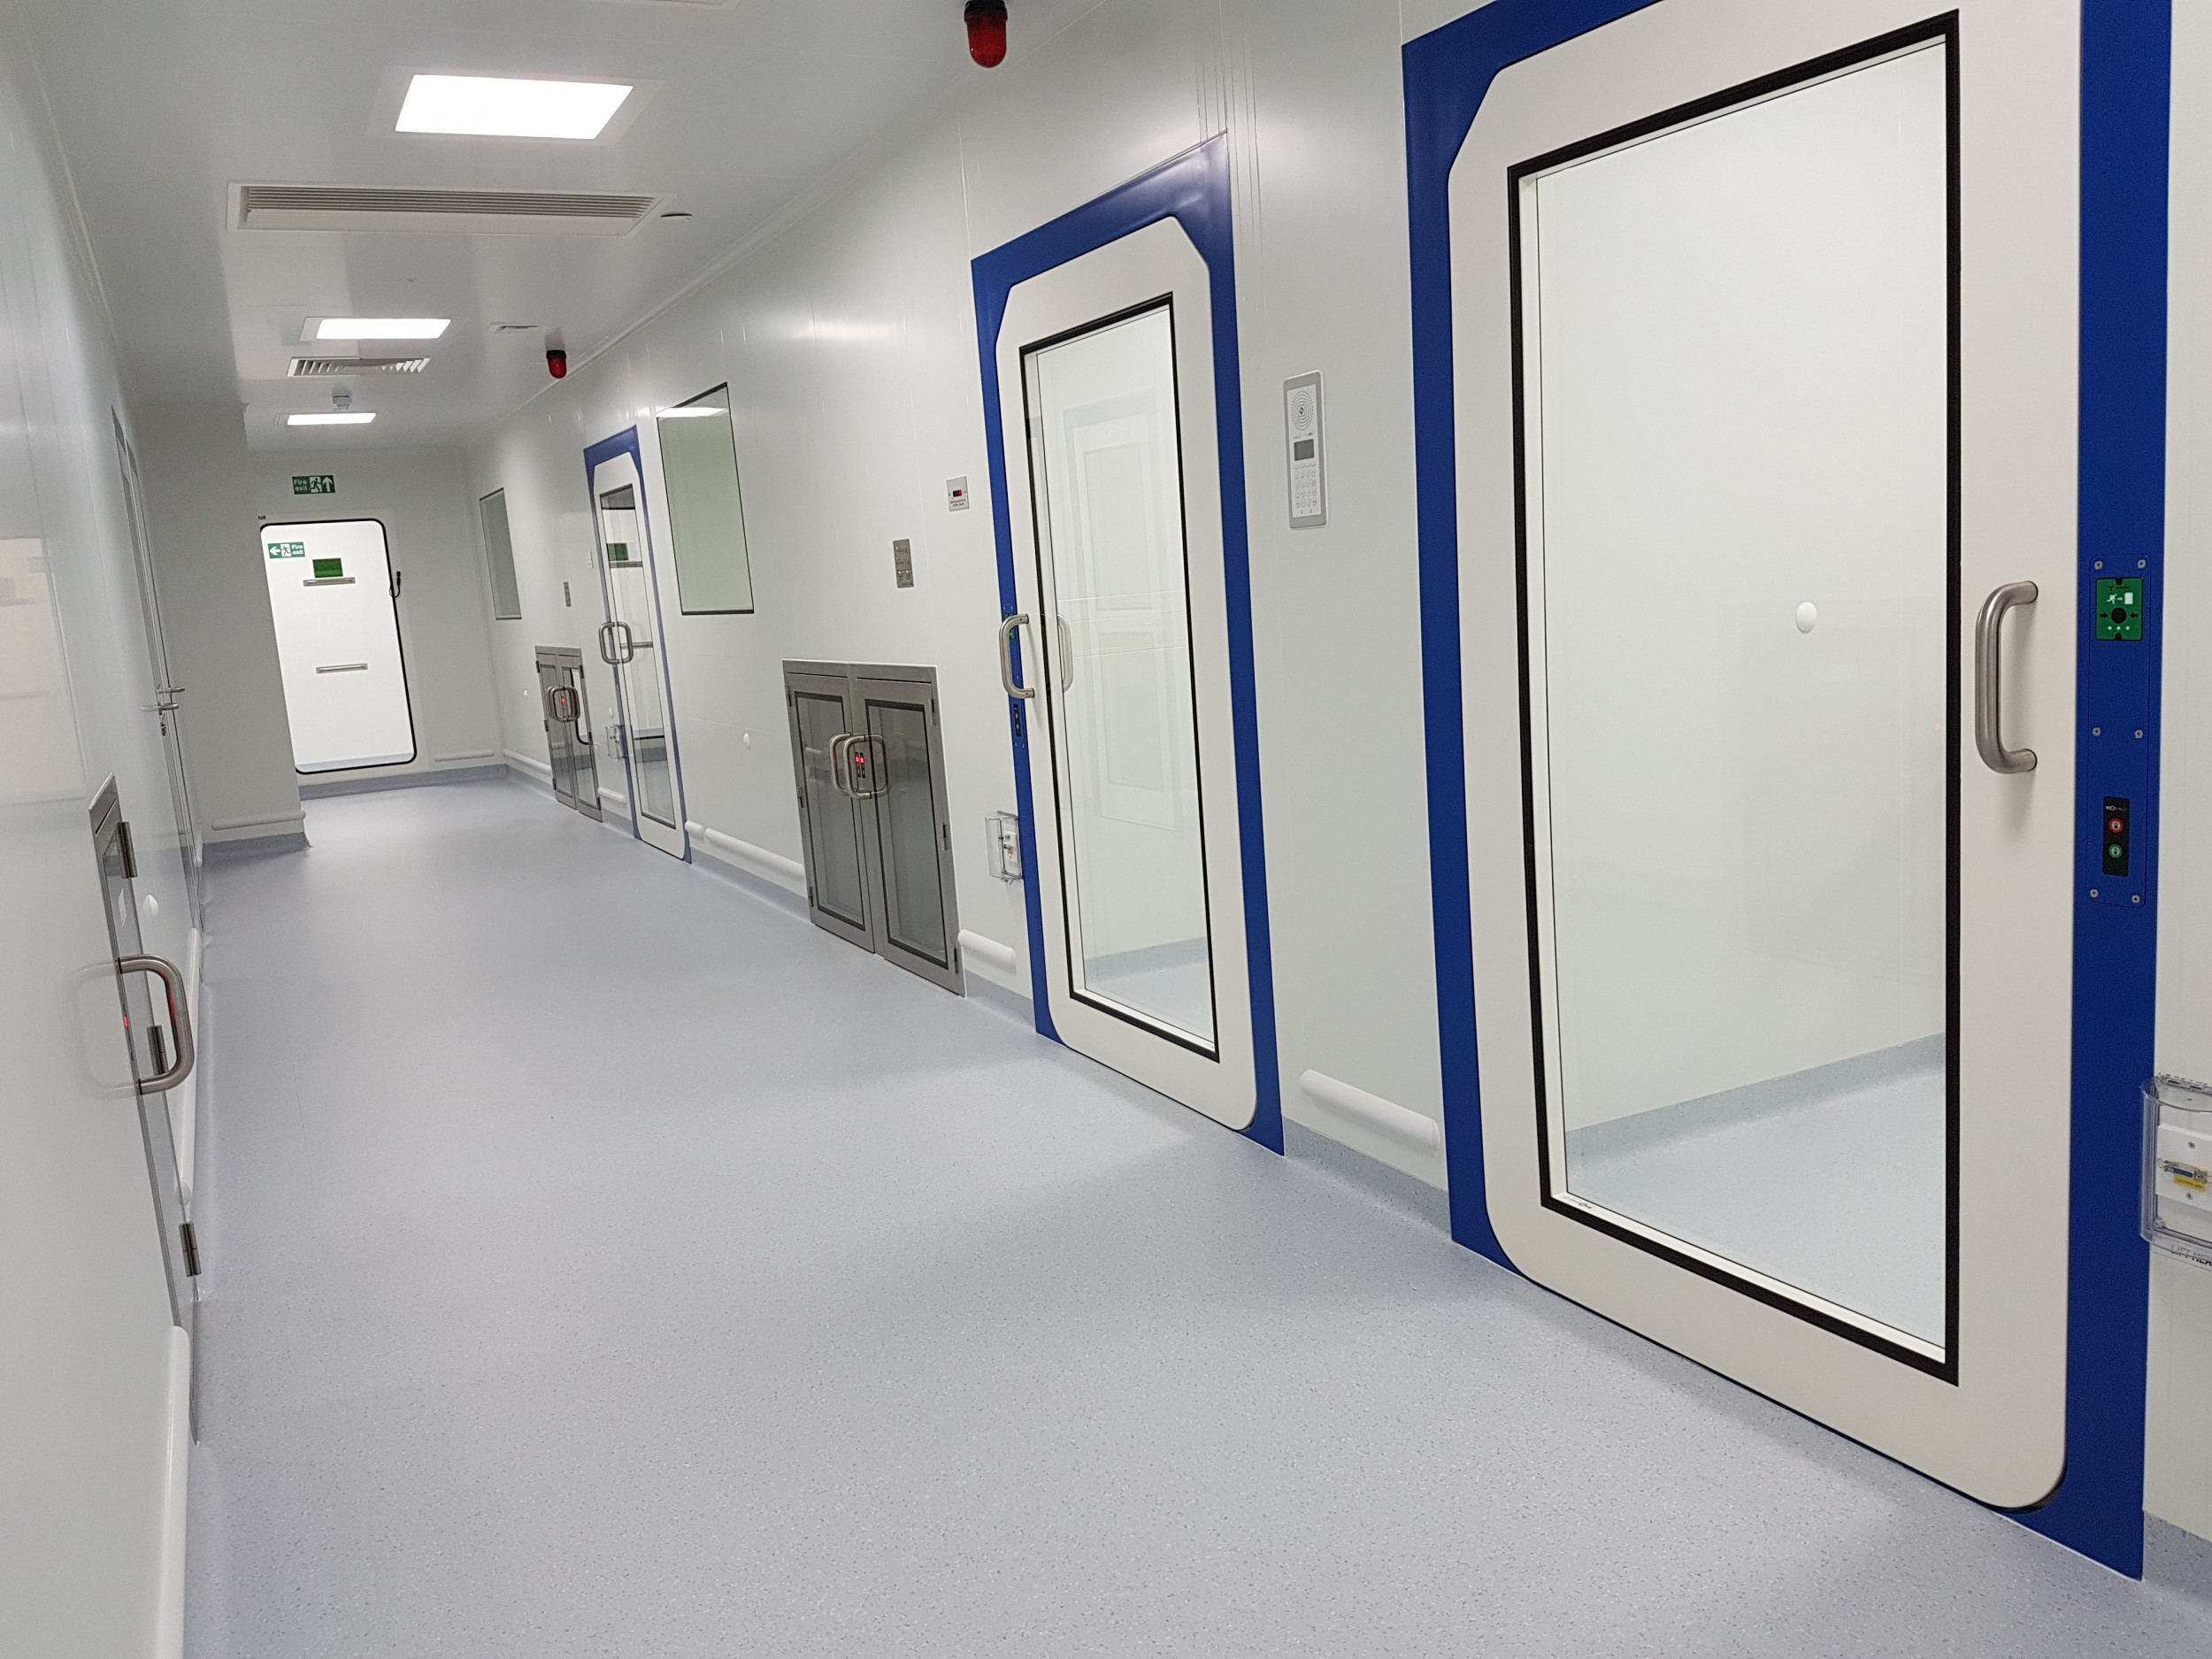 CRC specifies Gerflor's Mioplam flooring for MeiraGTx's new cleanroom facility